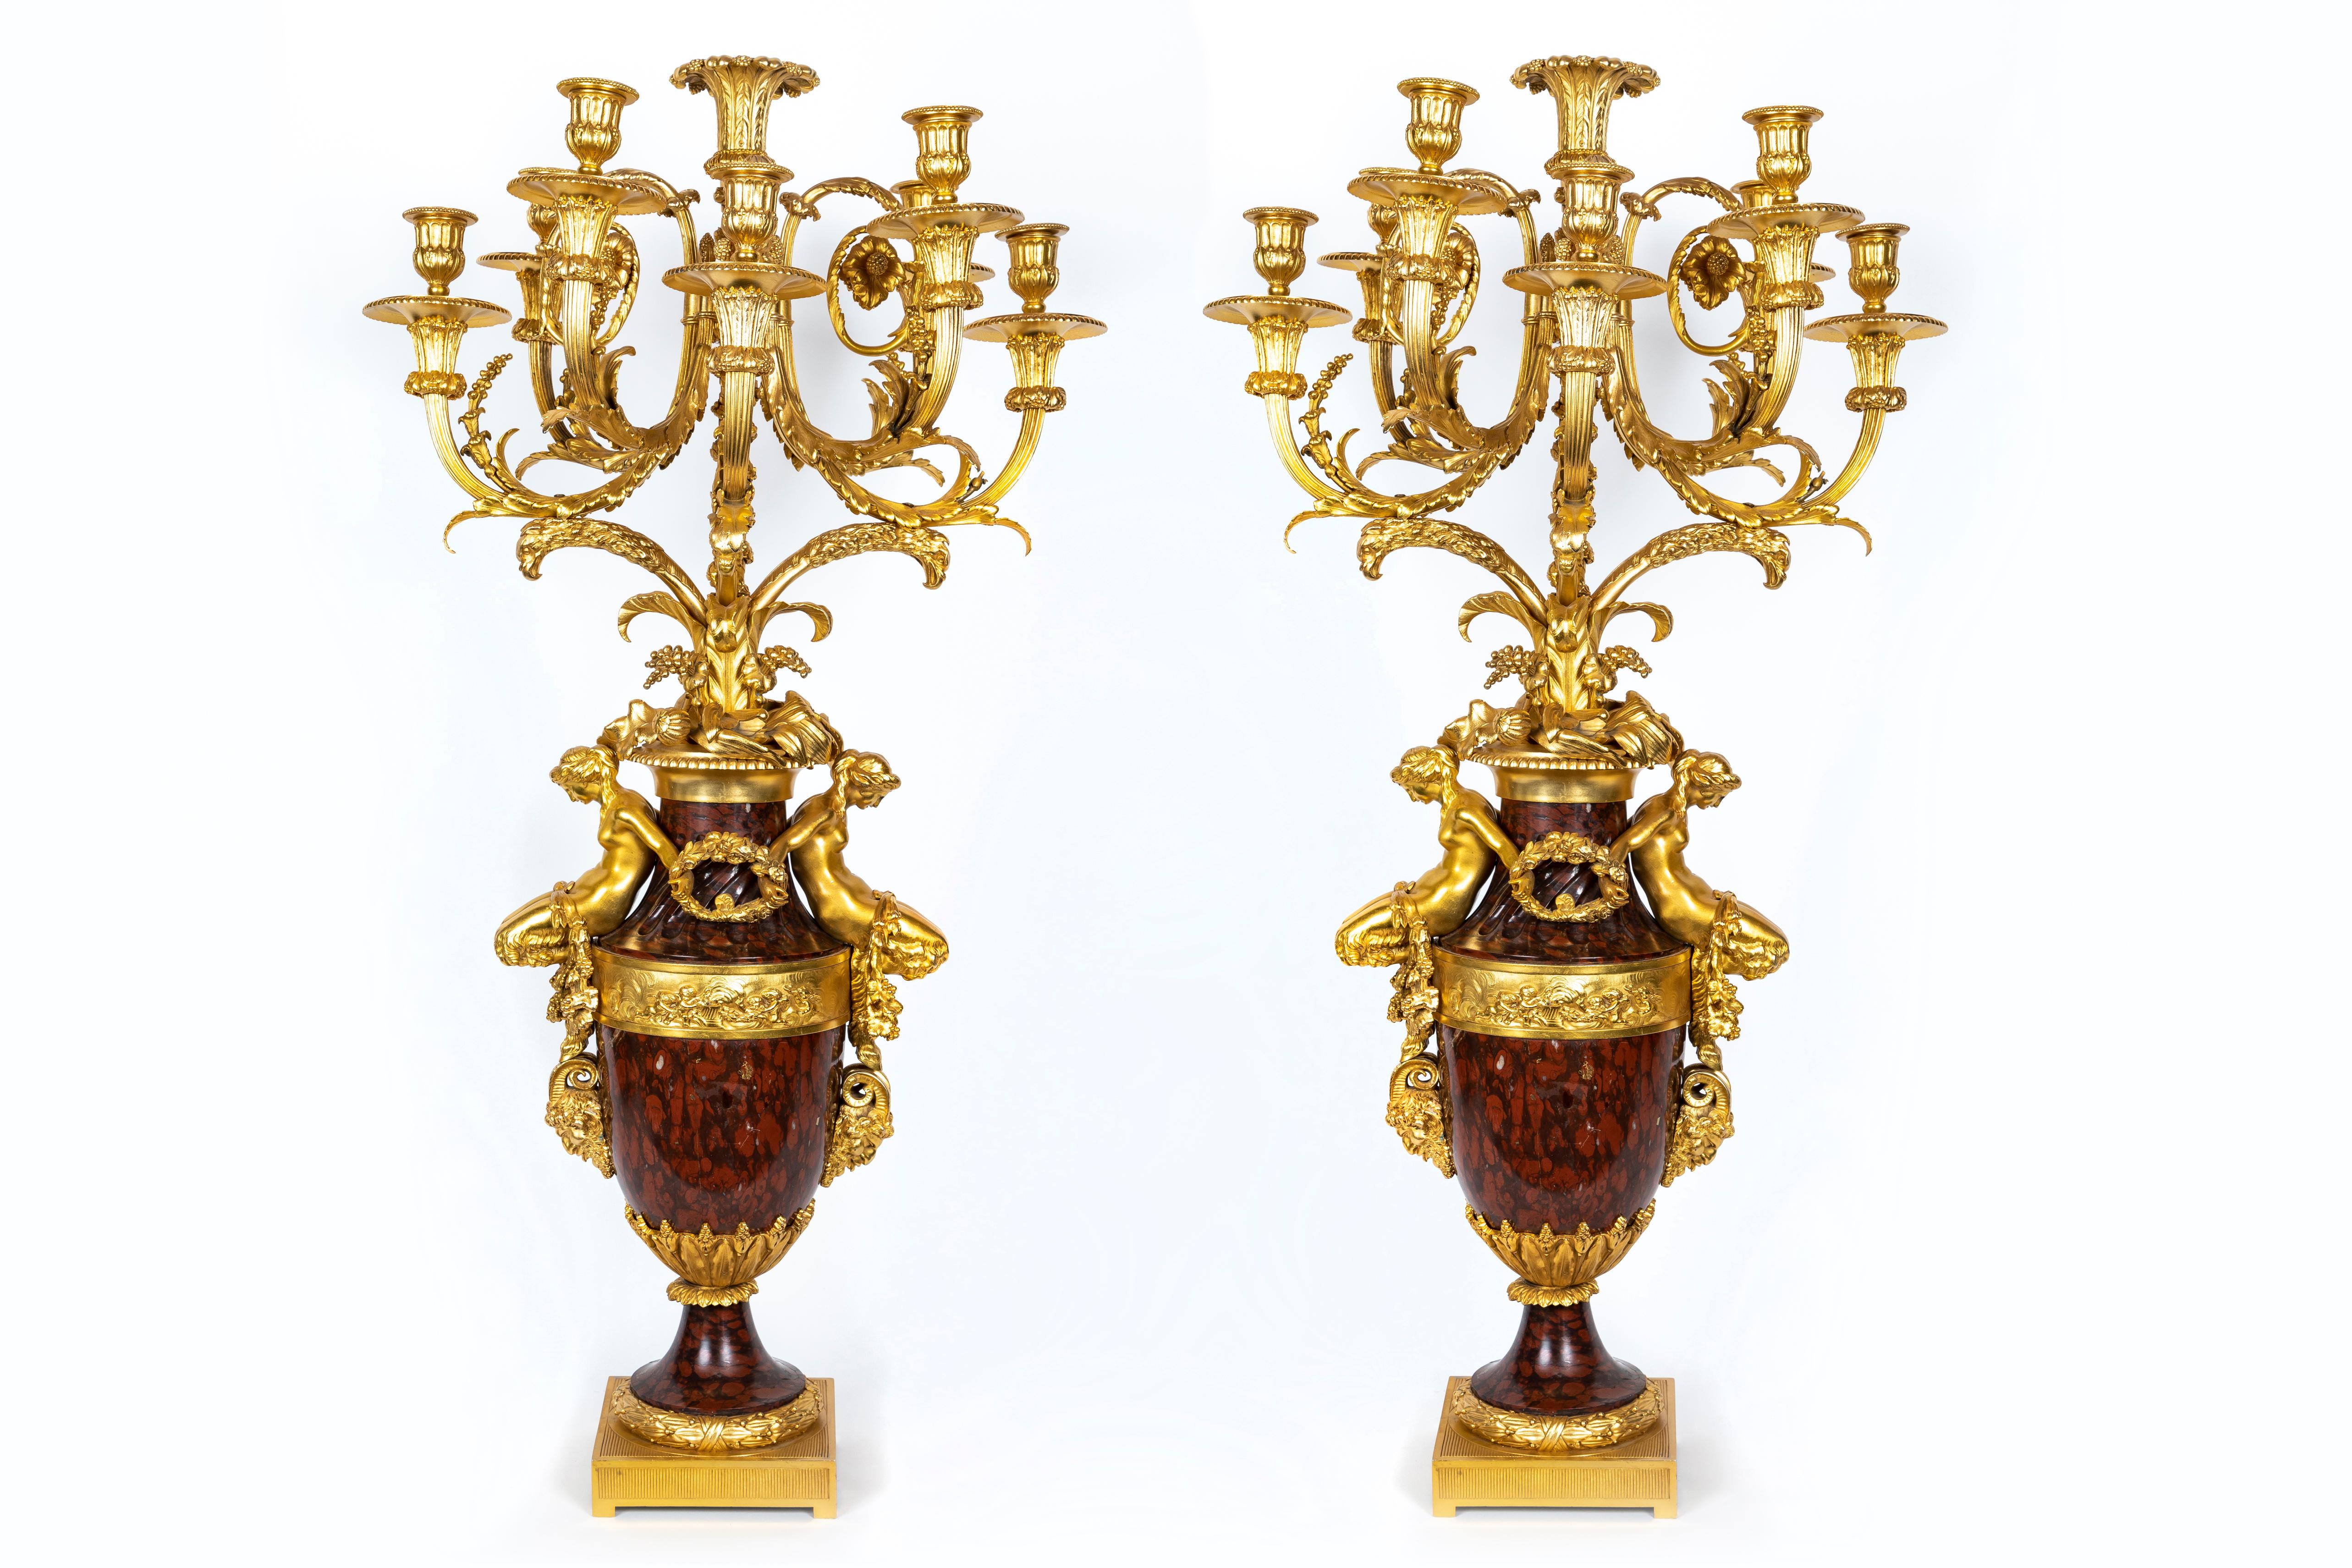 A Pair of highly important and large Magnificent Antique French Louis XVI style figural gilt bronze mounted hand carved rouge marble multi arm candelabras of exquisite craftsmanship attributed to Henry Dasson. Each large candelabra is embellished